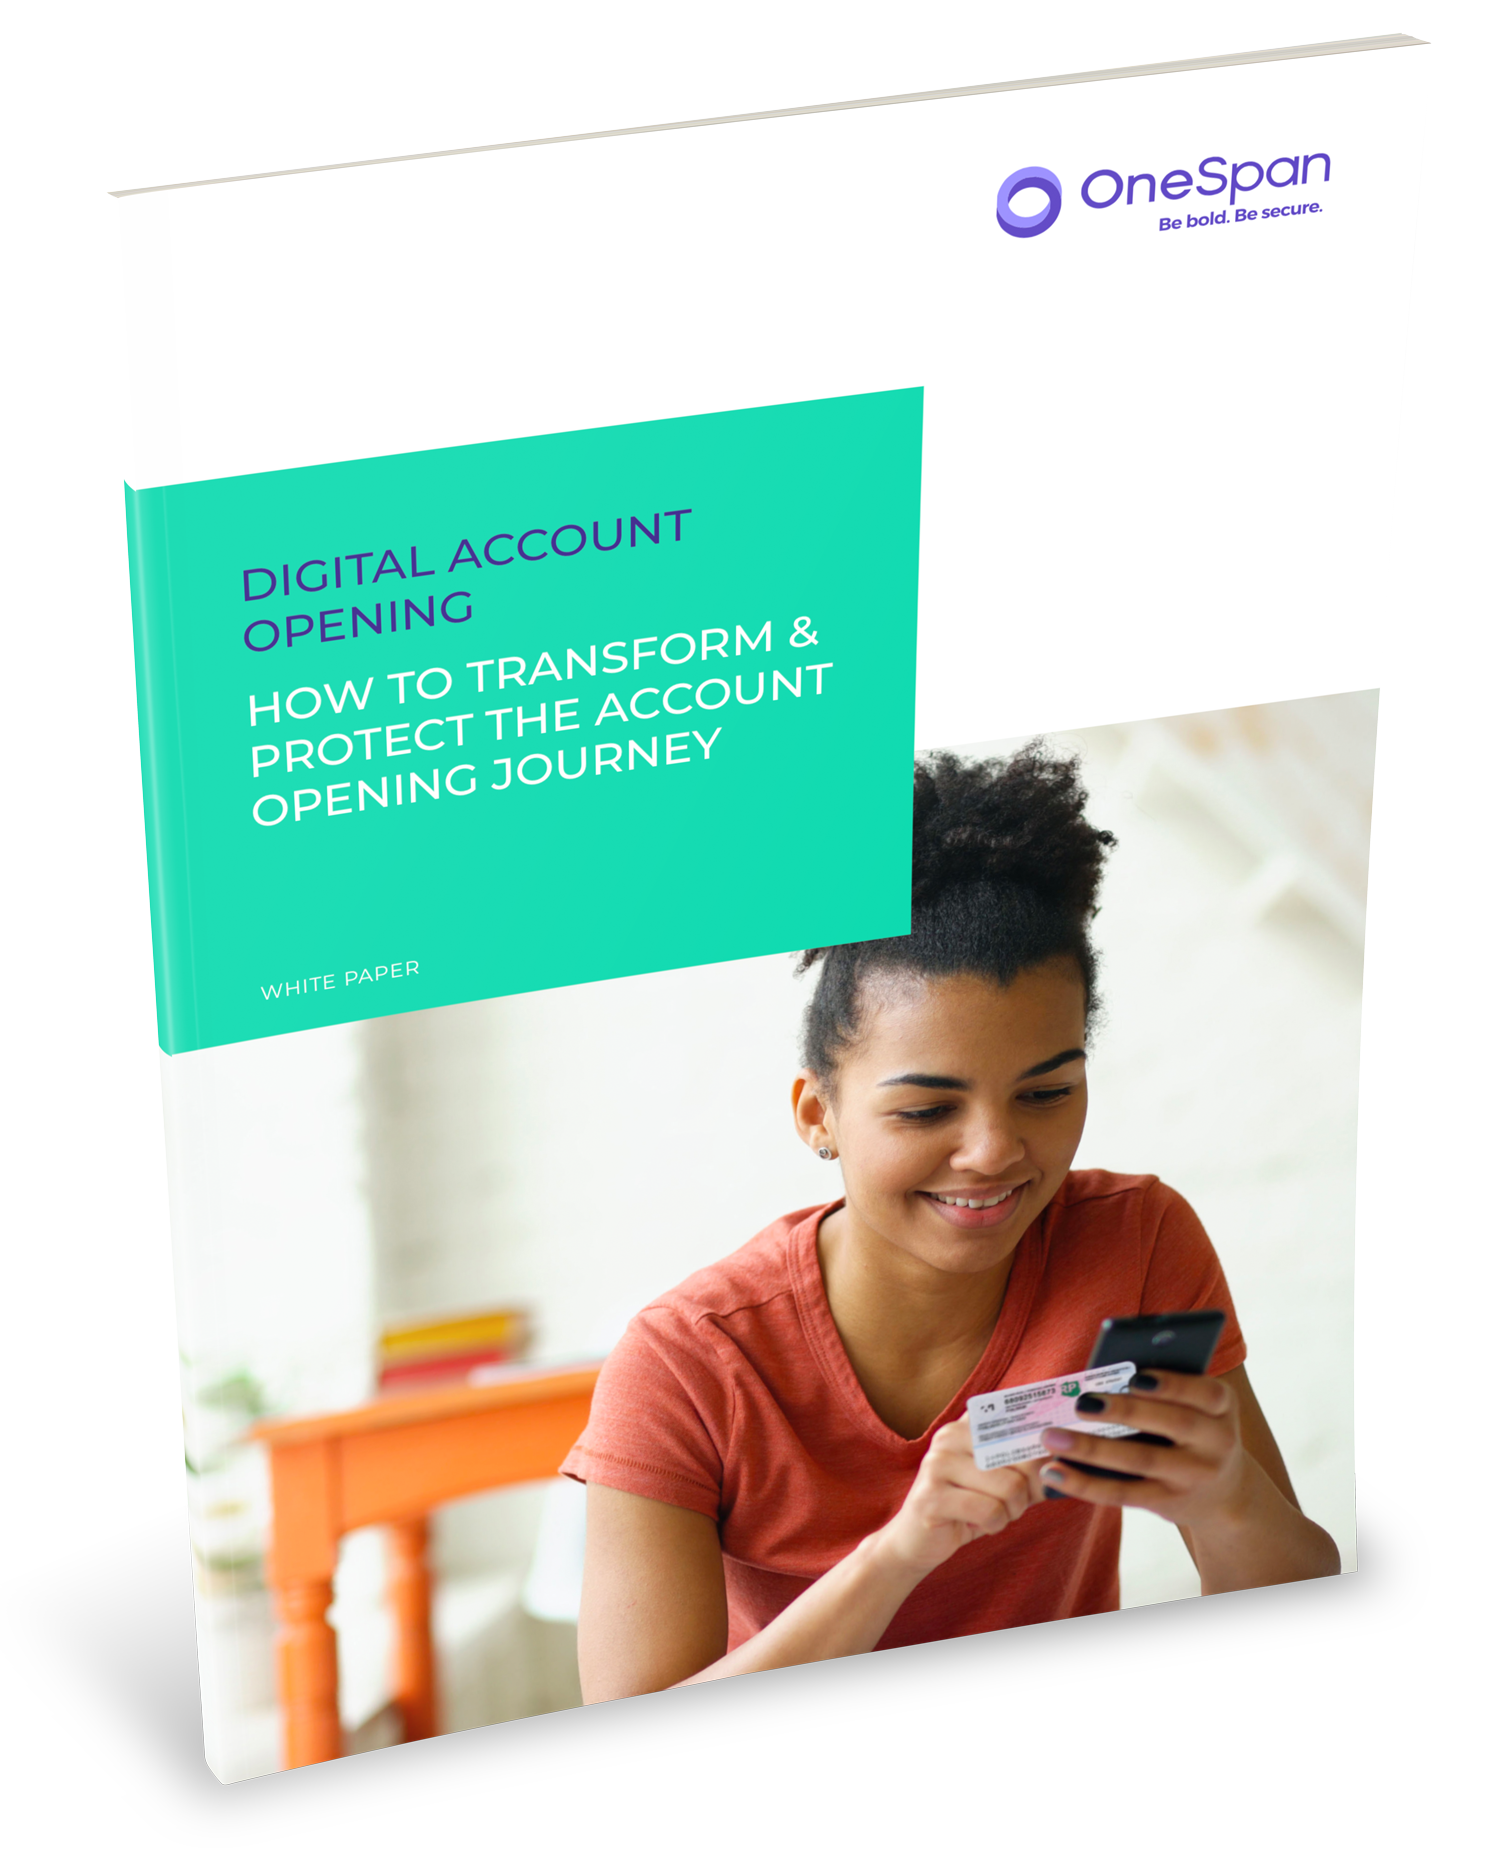 Digital Account Opening: How Banks Can Transform & Protect The Customer Journey